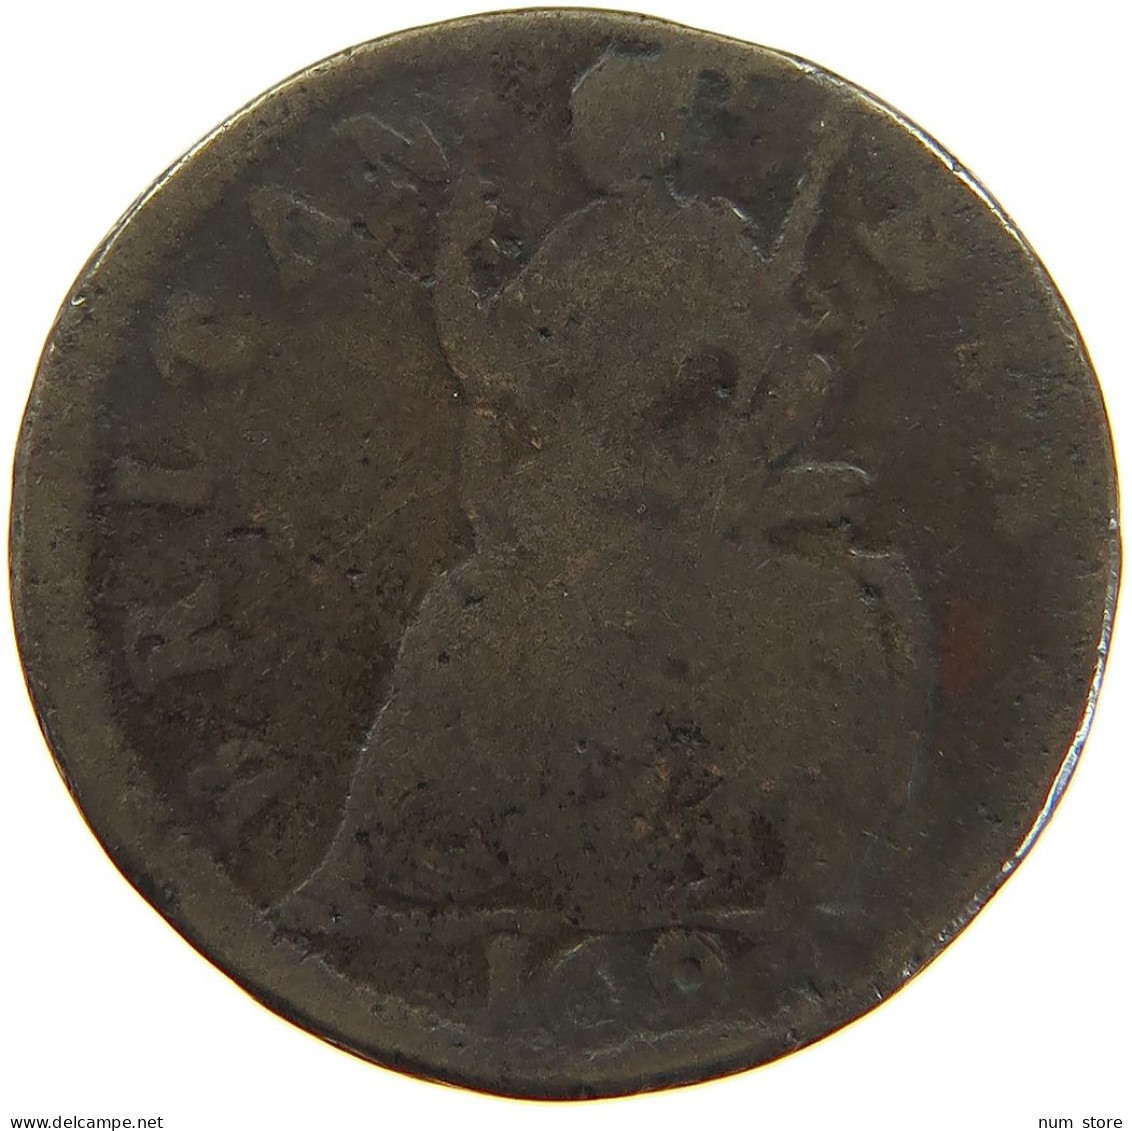 GREAT BRITAIN FARTHING 1694 #s082 0079 - A. 1 Farthing